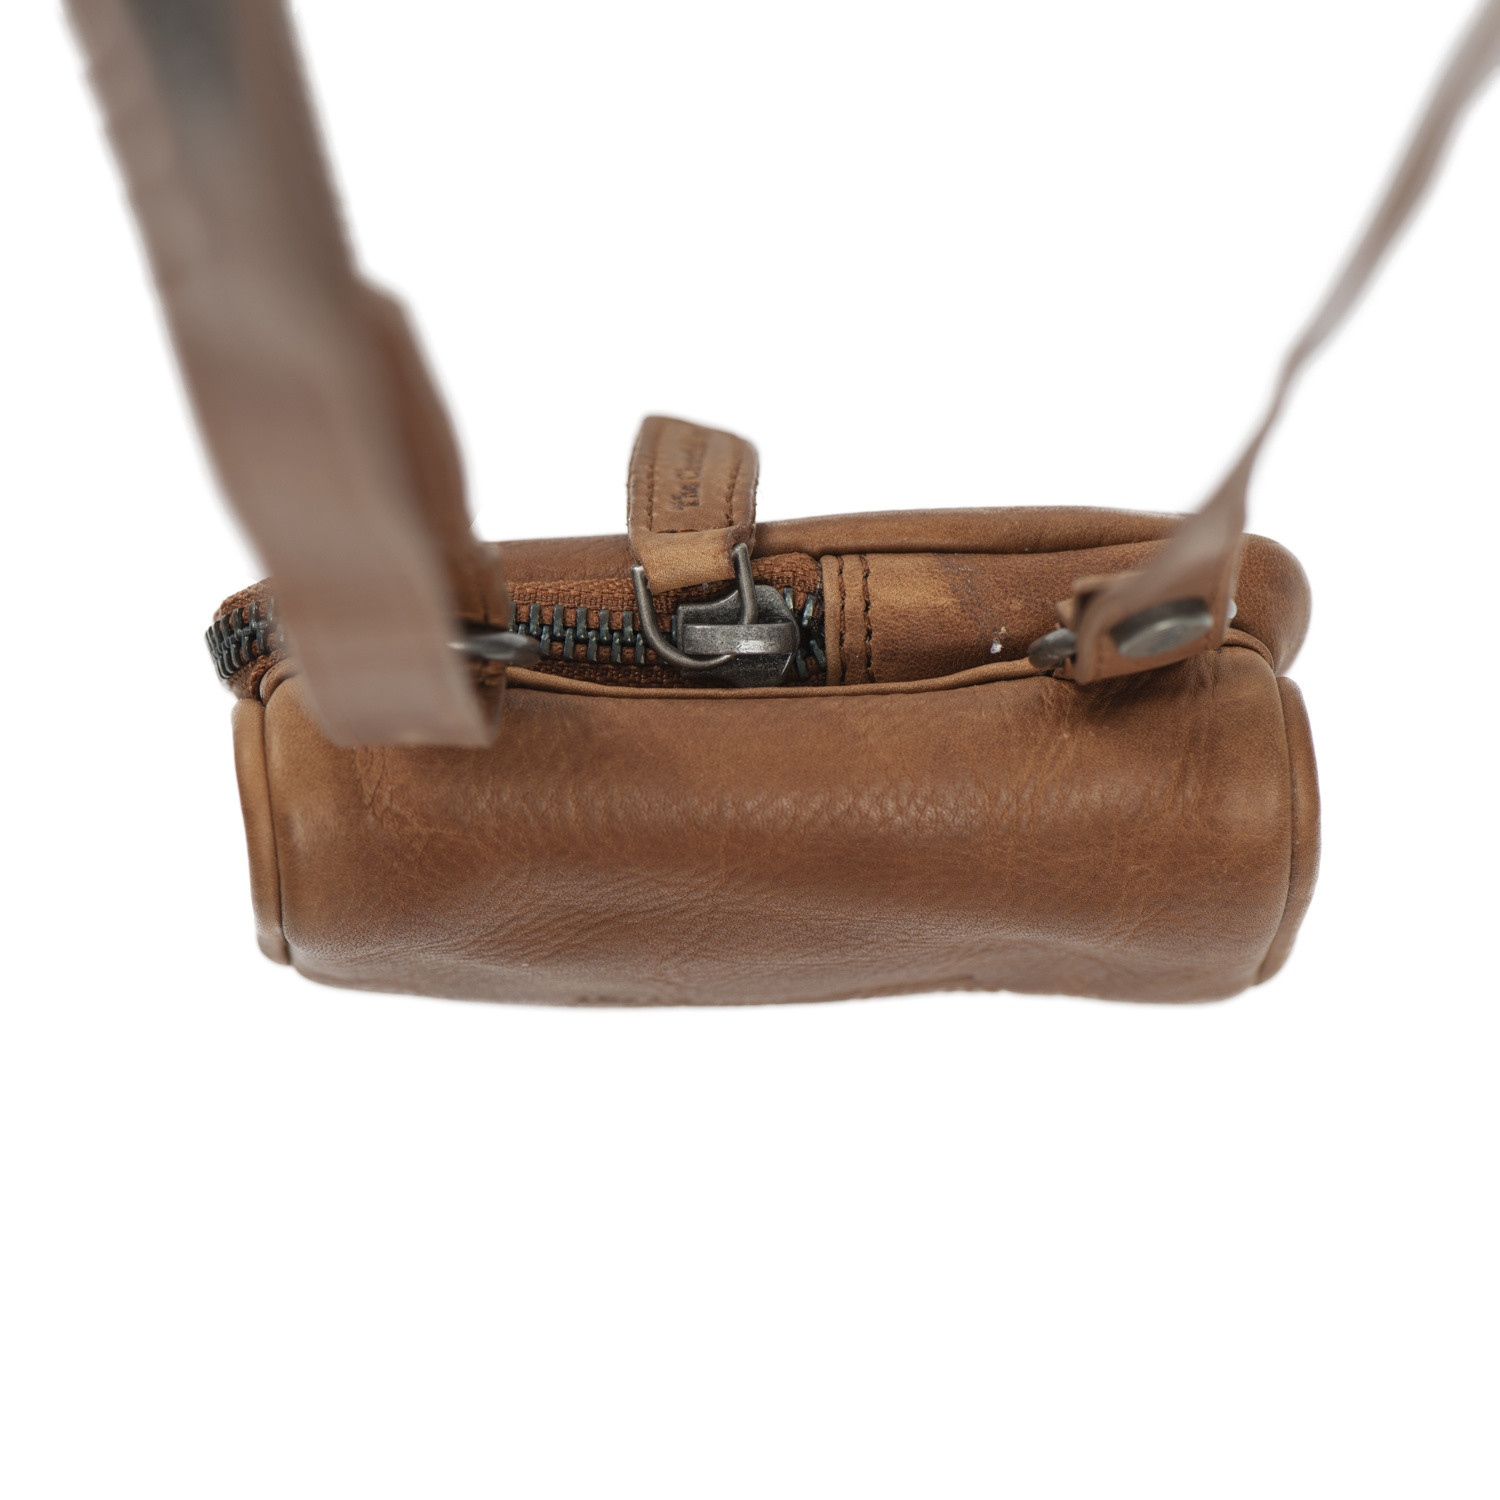 Phone Pouch - Brown leather pouch